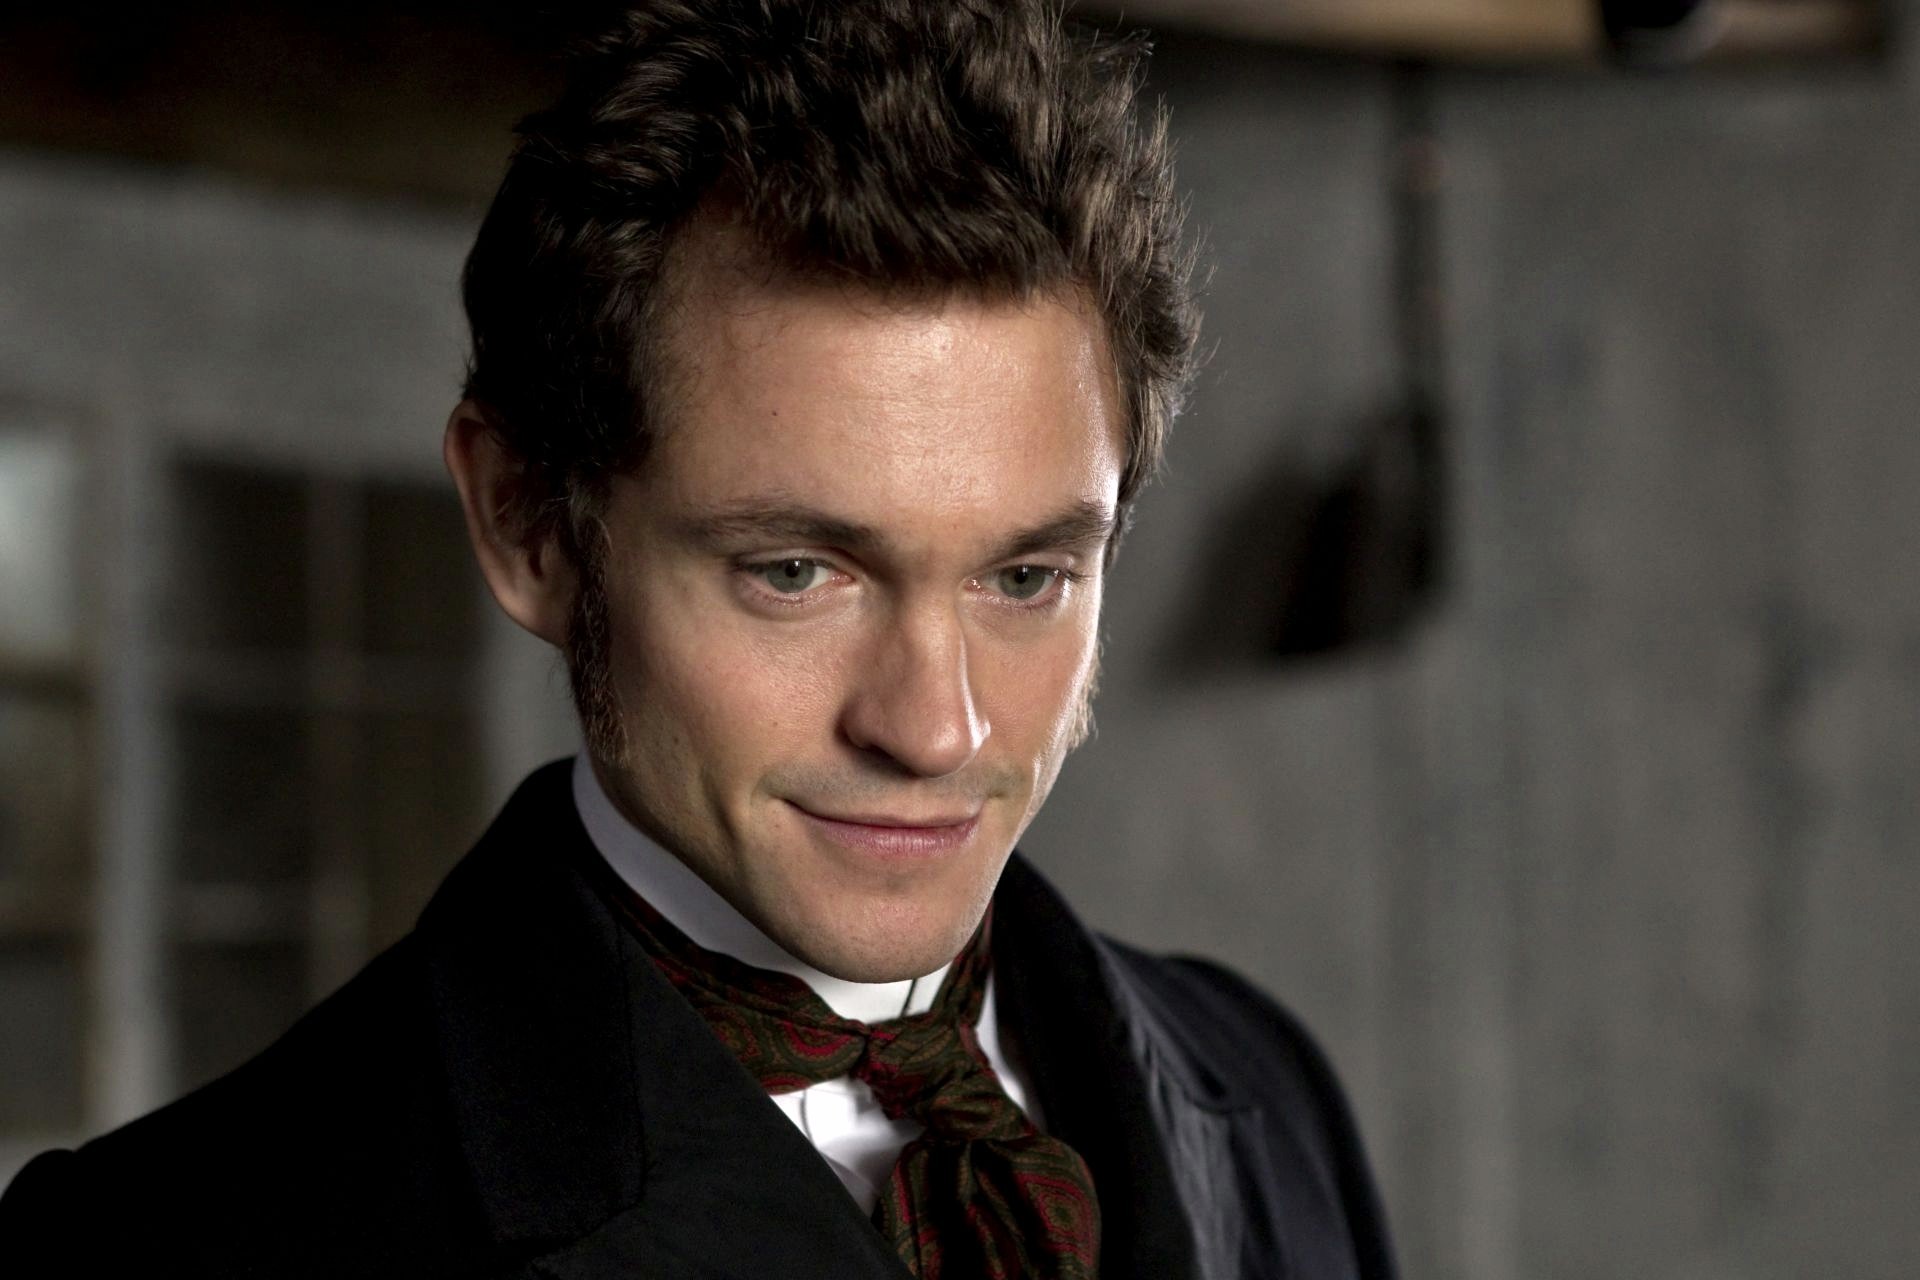 Hugh Dancy stars as Dr. Mortimer Granville in Sony Pictures Classics' Hysteria (2012). Photo credit by Ricardo Vaz Palma.